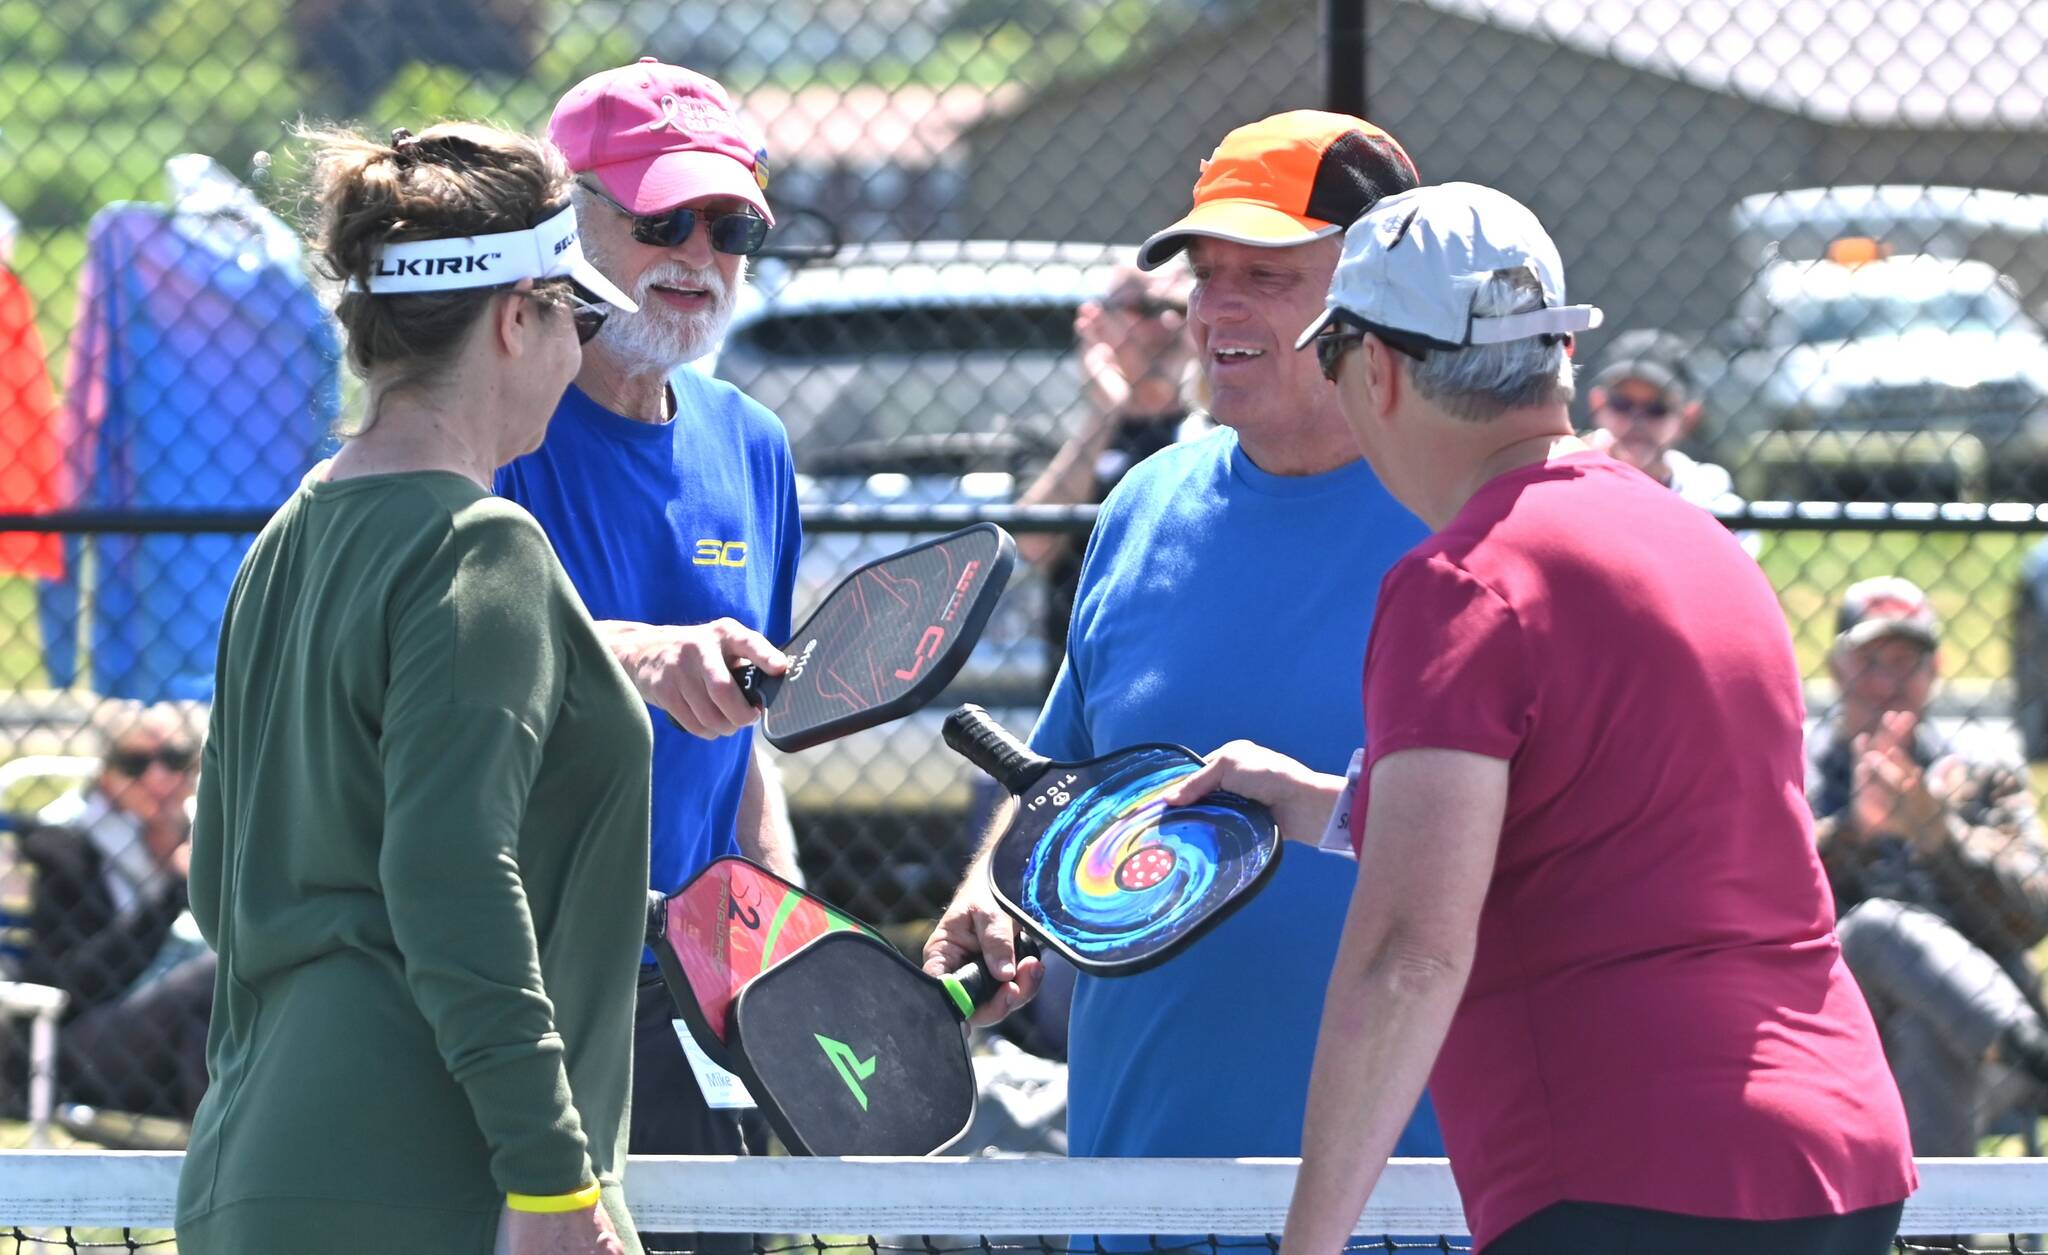 Sequim Gazette photo by Michael Dashiell / Mike Richer, left, and Kevin Jenks share post-match congrats with Cindi Pettit, far left, and Sherri Gyovai in the championship match at the Big Dill Fun Day tournament at Carrie Blake Community Park on May 20.